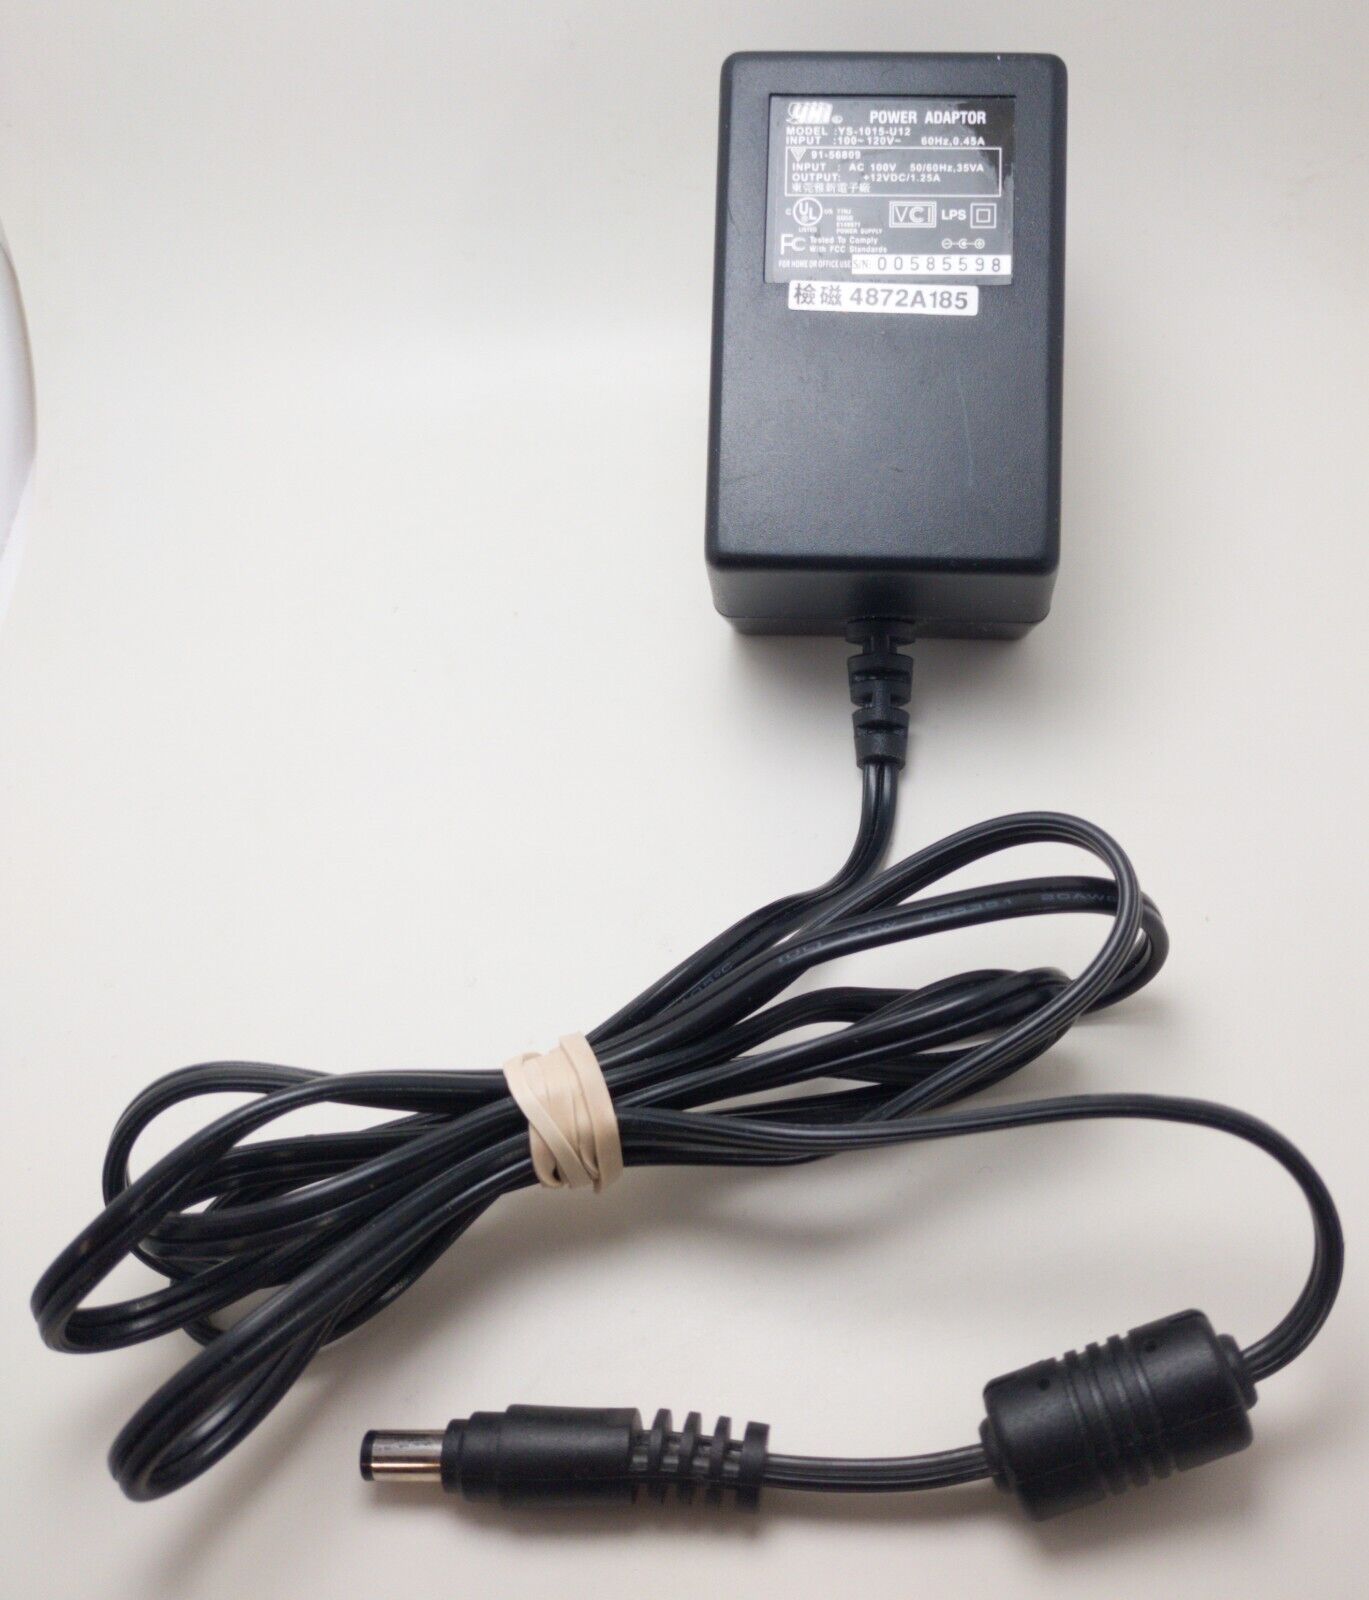 *Brand NEW* YHI YS-1015-U12 91-56809 In 100V Out 12VDC 1.25A AC ADAPTER Power Supply TESTED